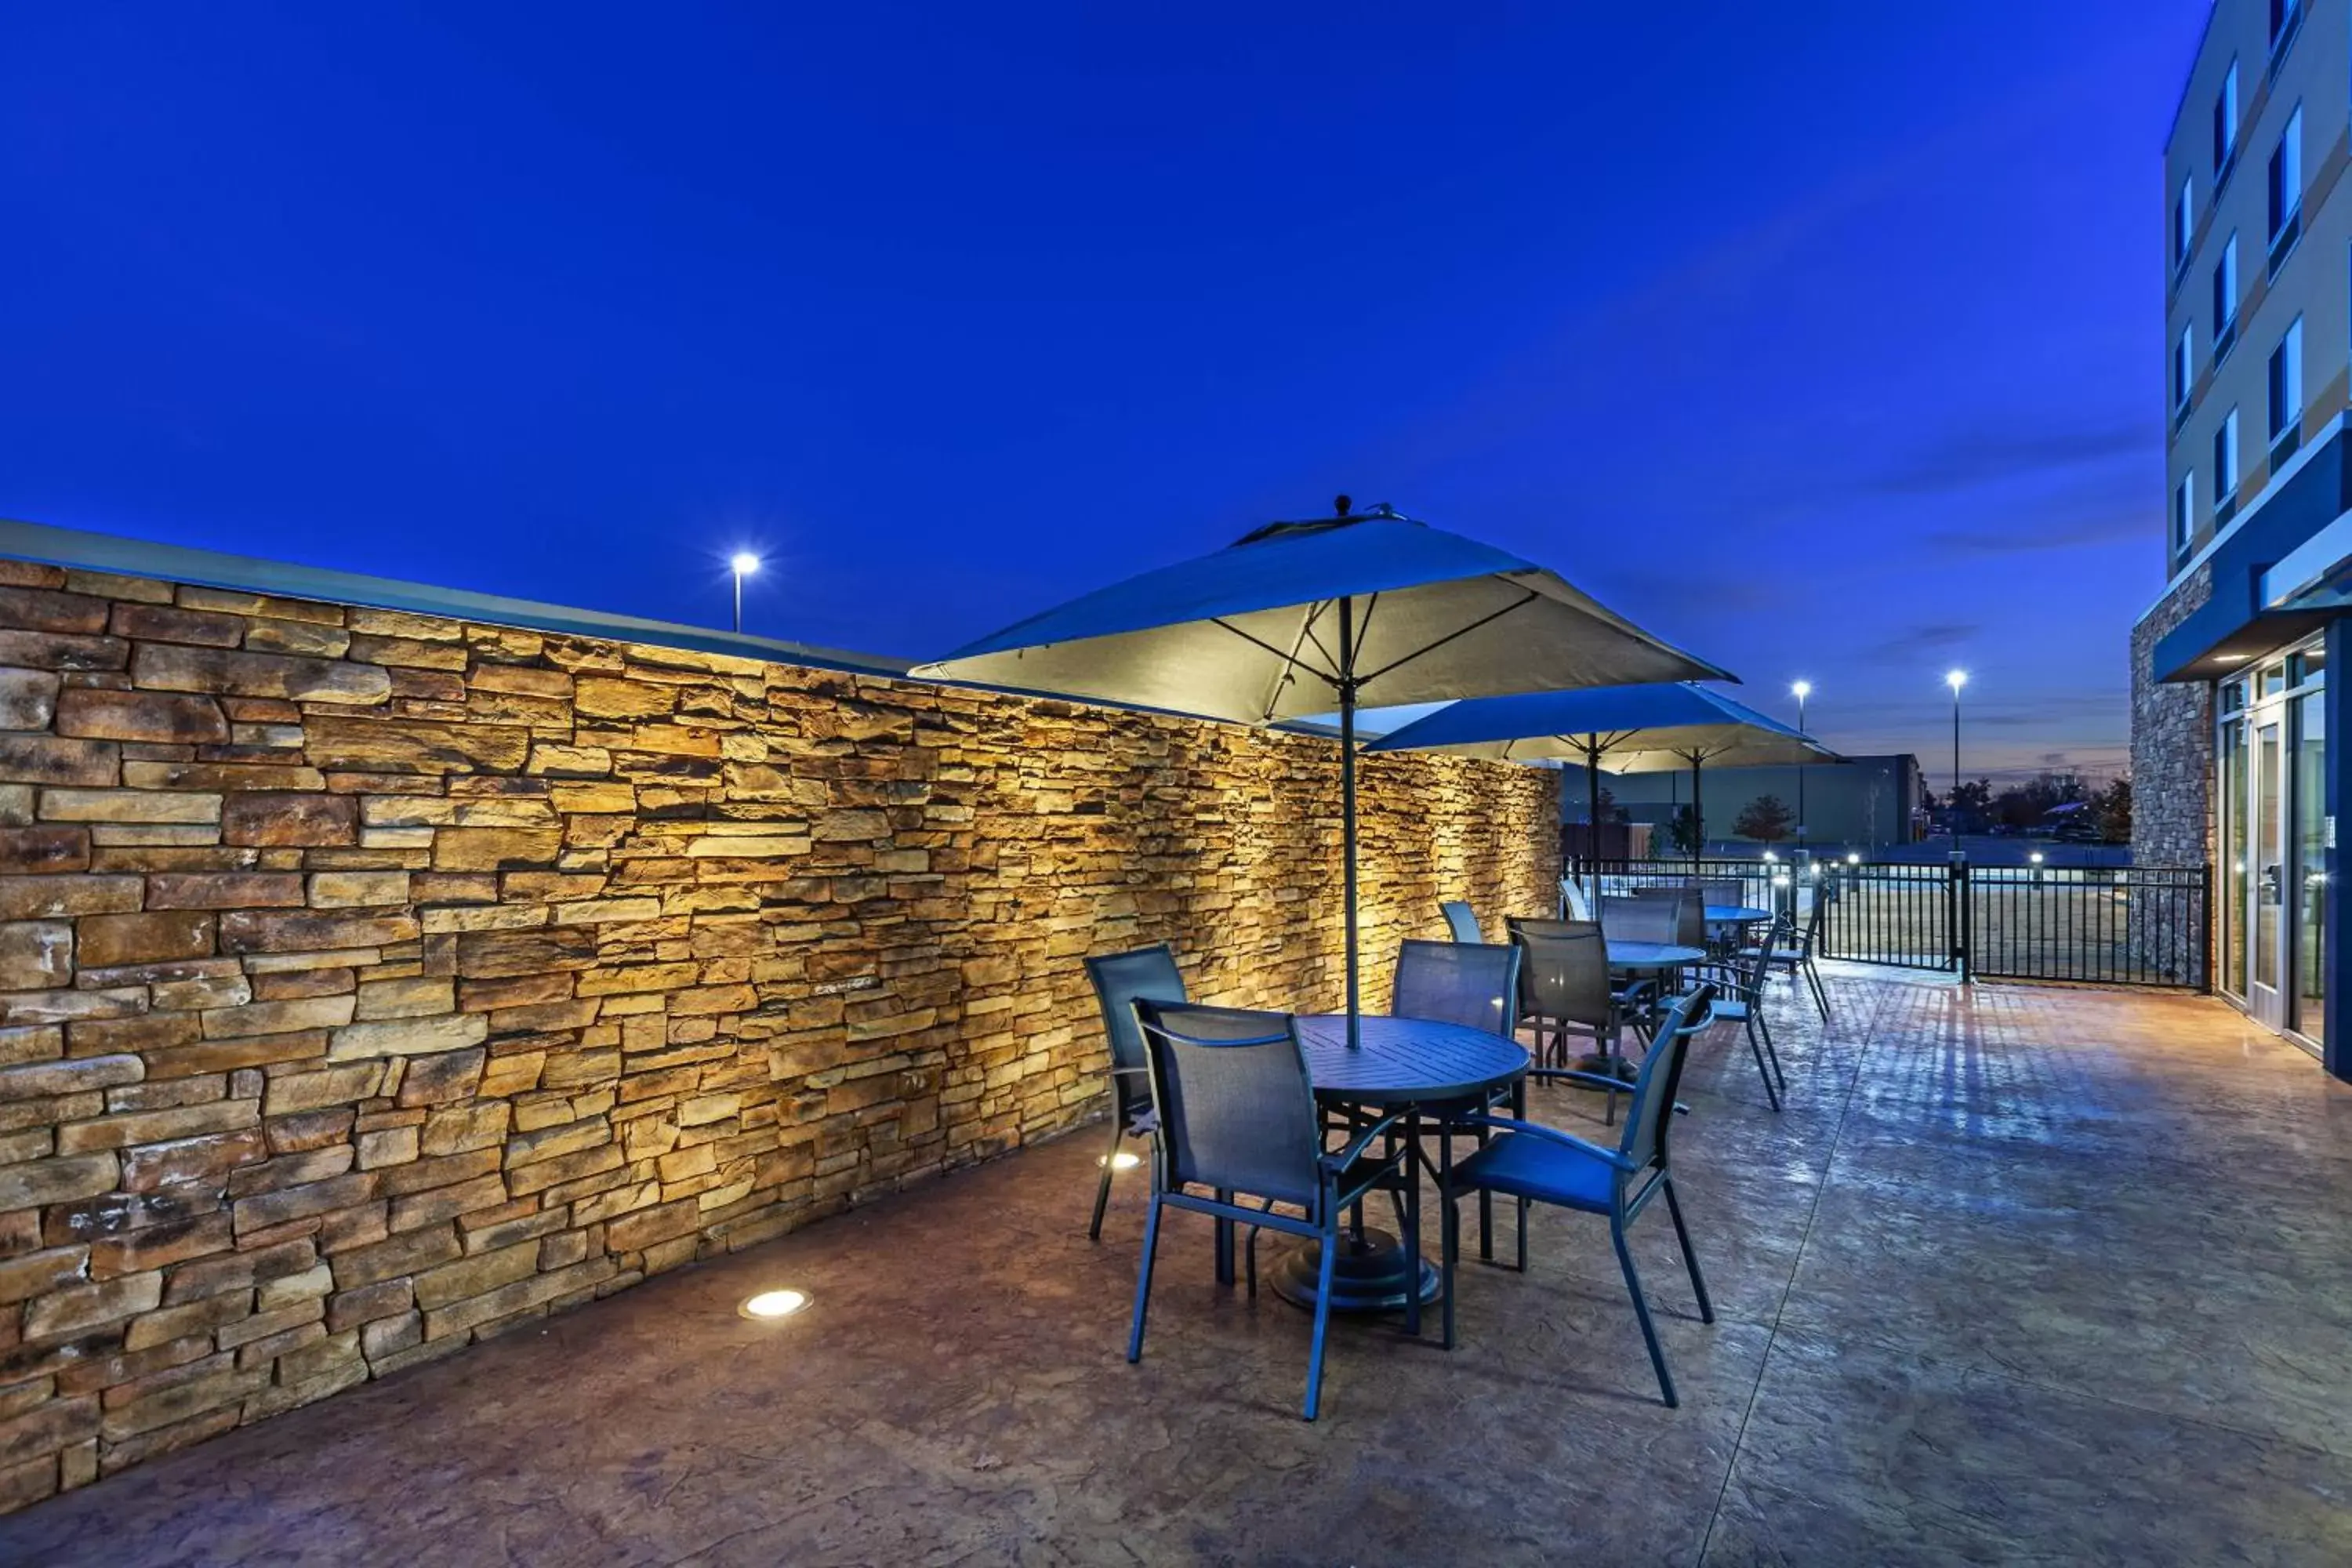 Property building in Fairfield Inn & Suites by Marriott Tulsa Catoosa